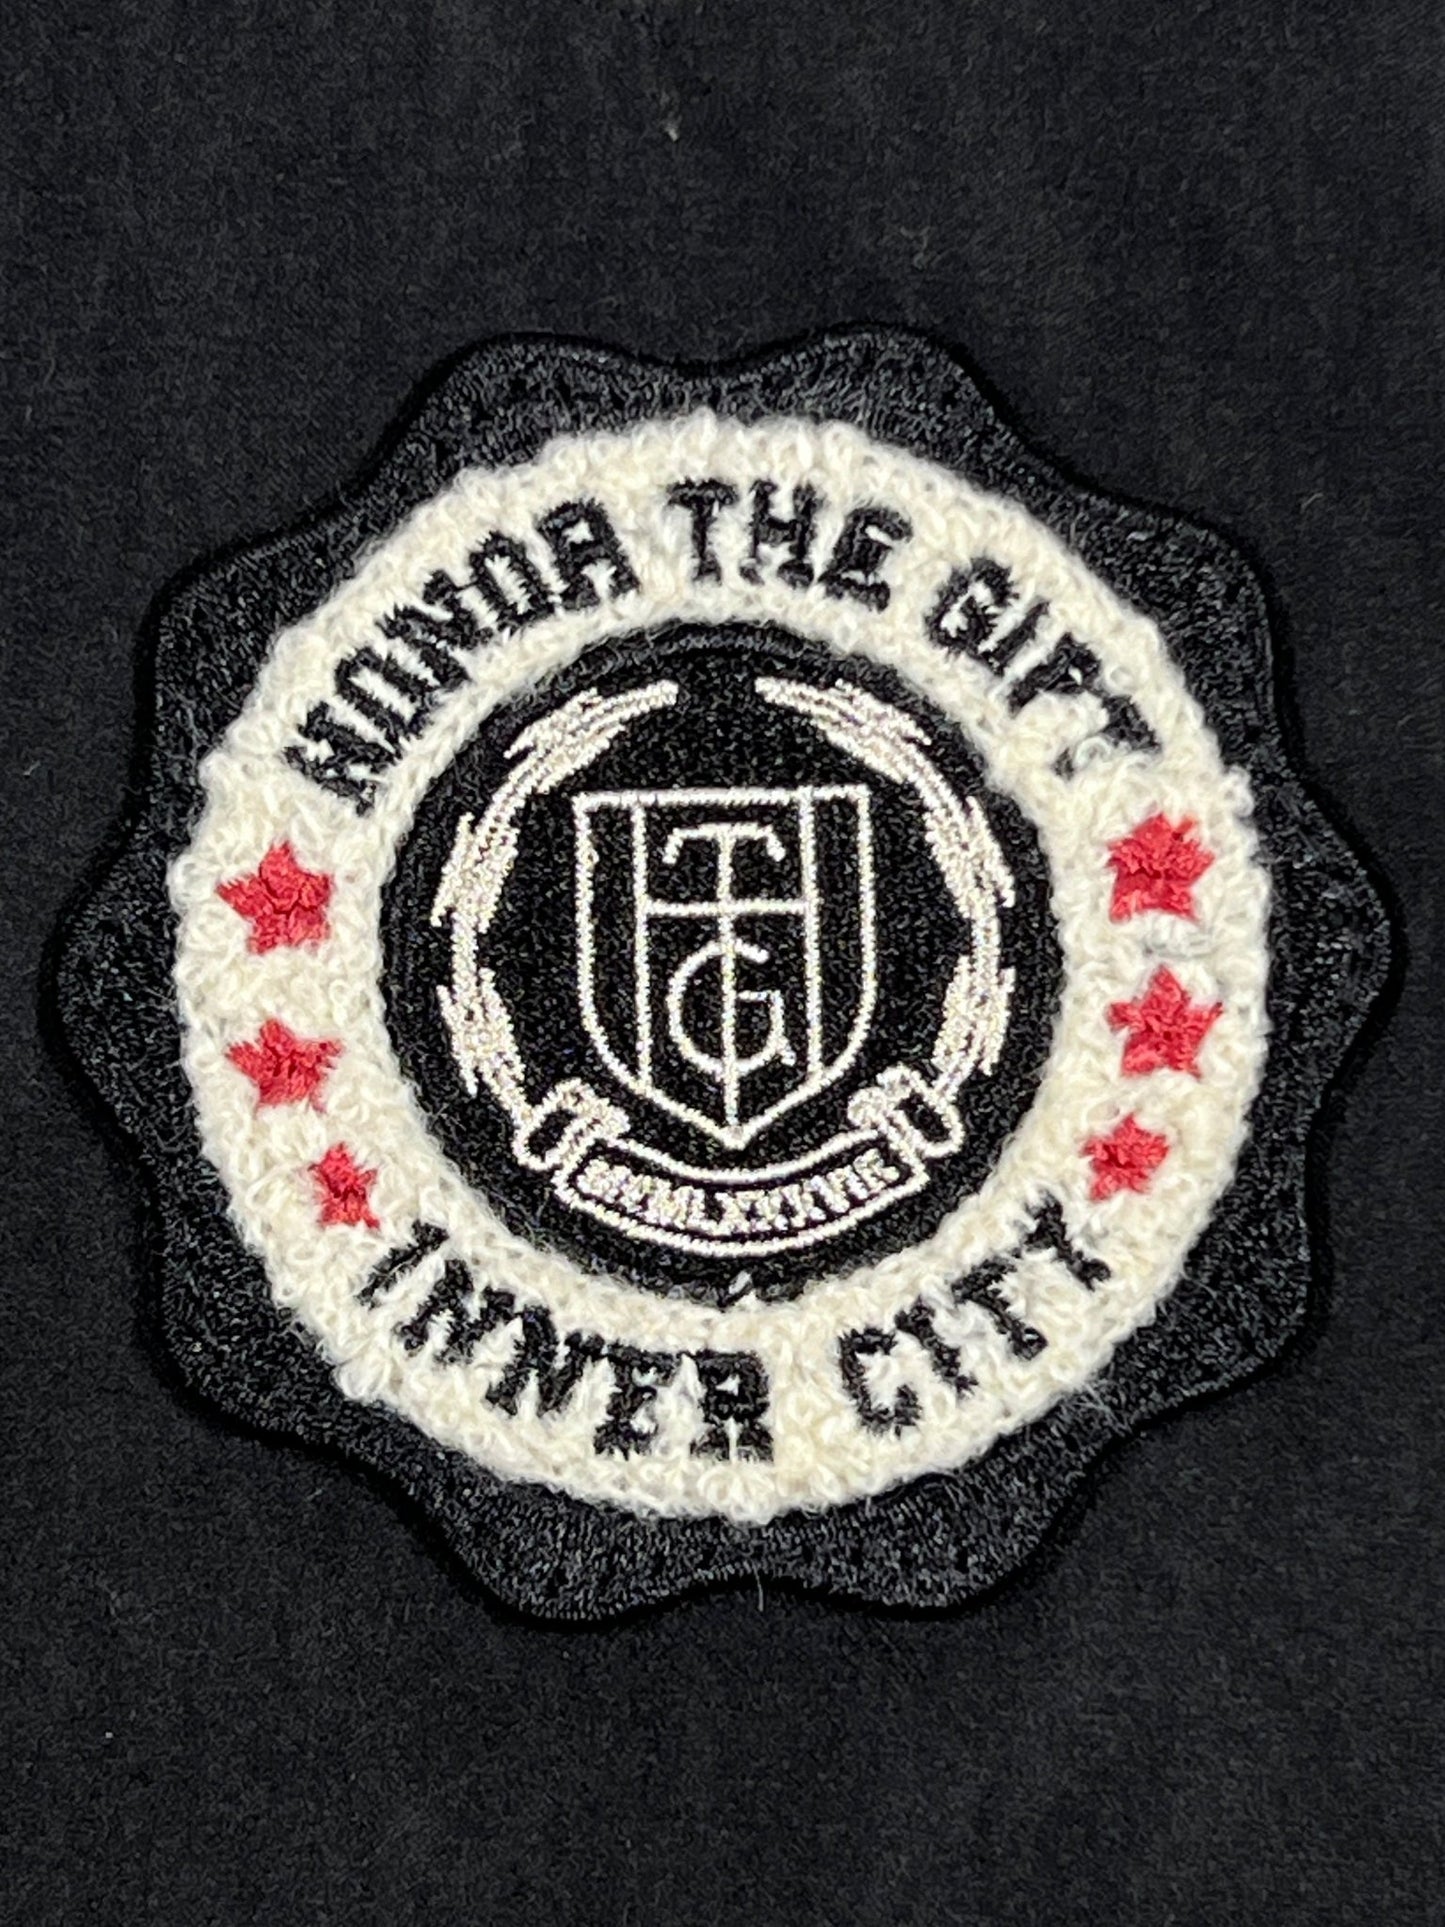 Chenille patch featuring a shield with "HONOR THE GIFT" text, a central monogram, surrounded by "MIND THE GAP" and four red stars on a black background.